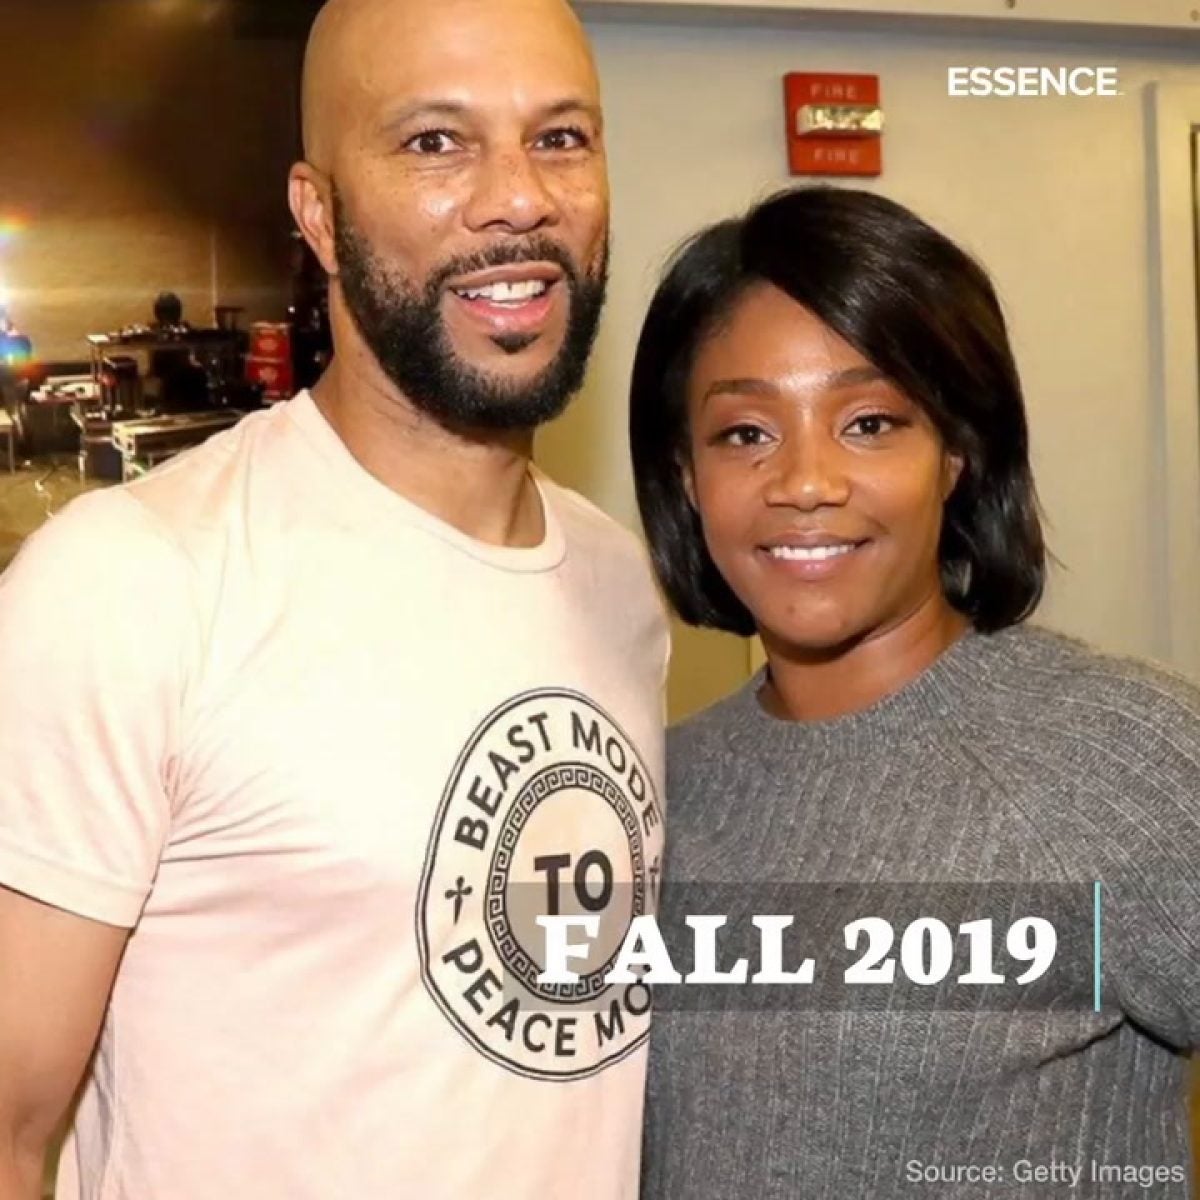 IMF| Tiffany Haddish And Common Reportedly Call It Quits: Their Relationship Timeline